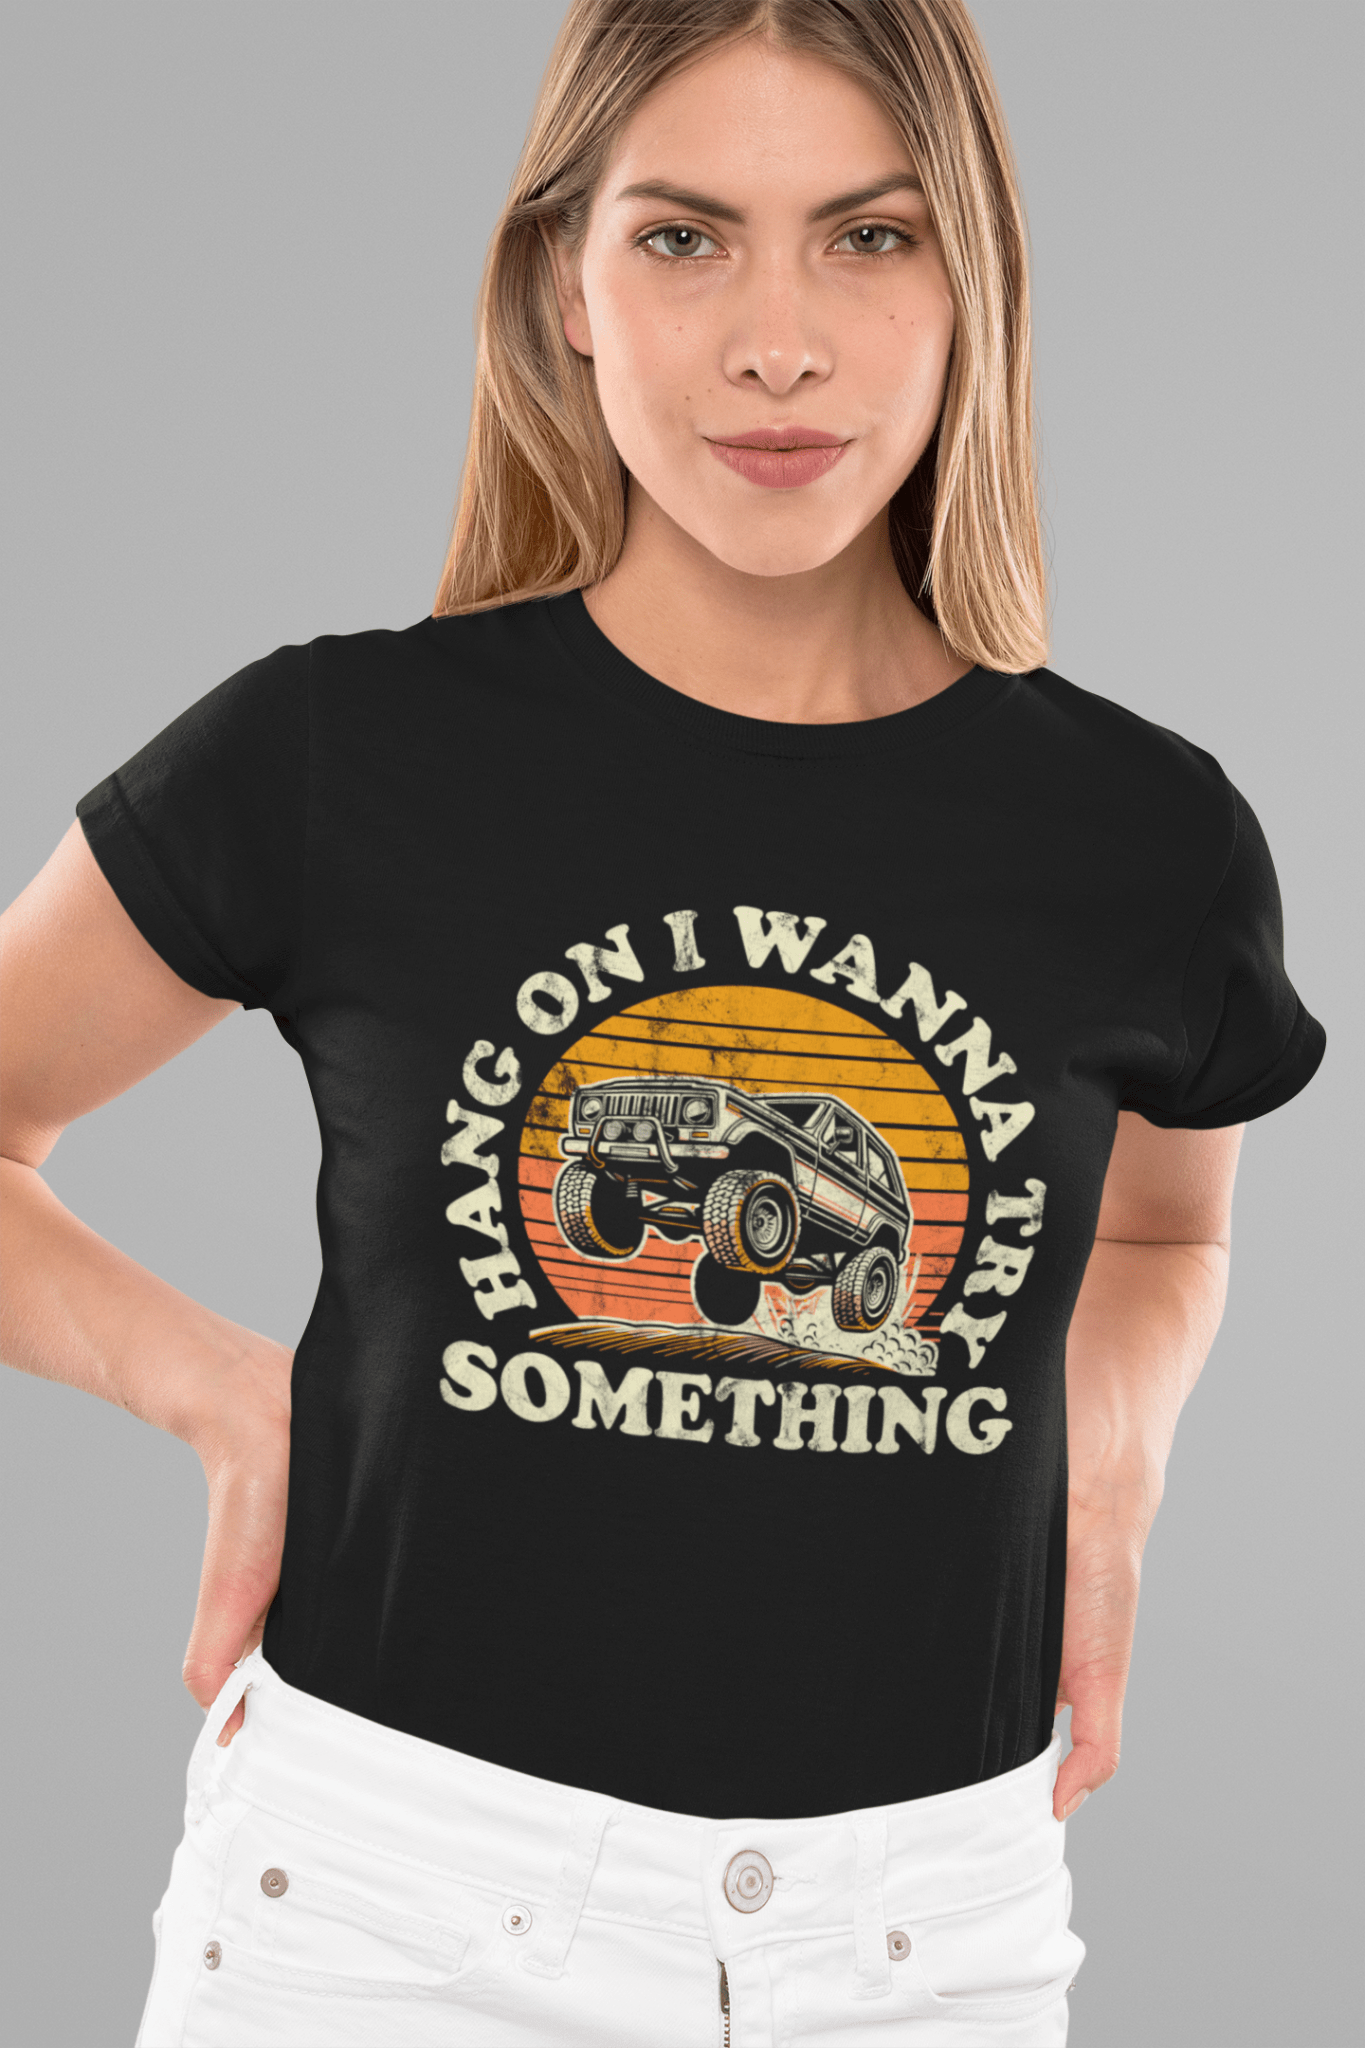 Hang On I Wanna Try Something Women's Tee - Goats Trail Off-Road Apparel Company